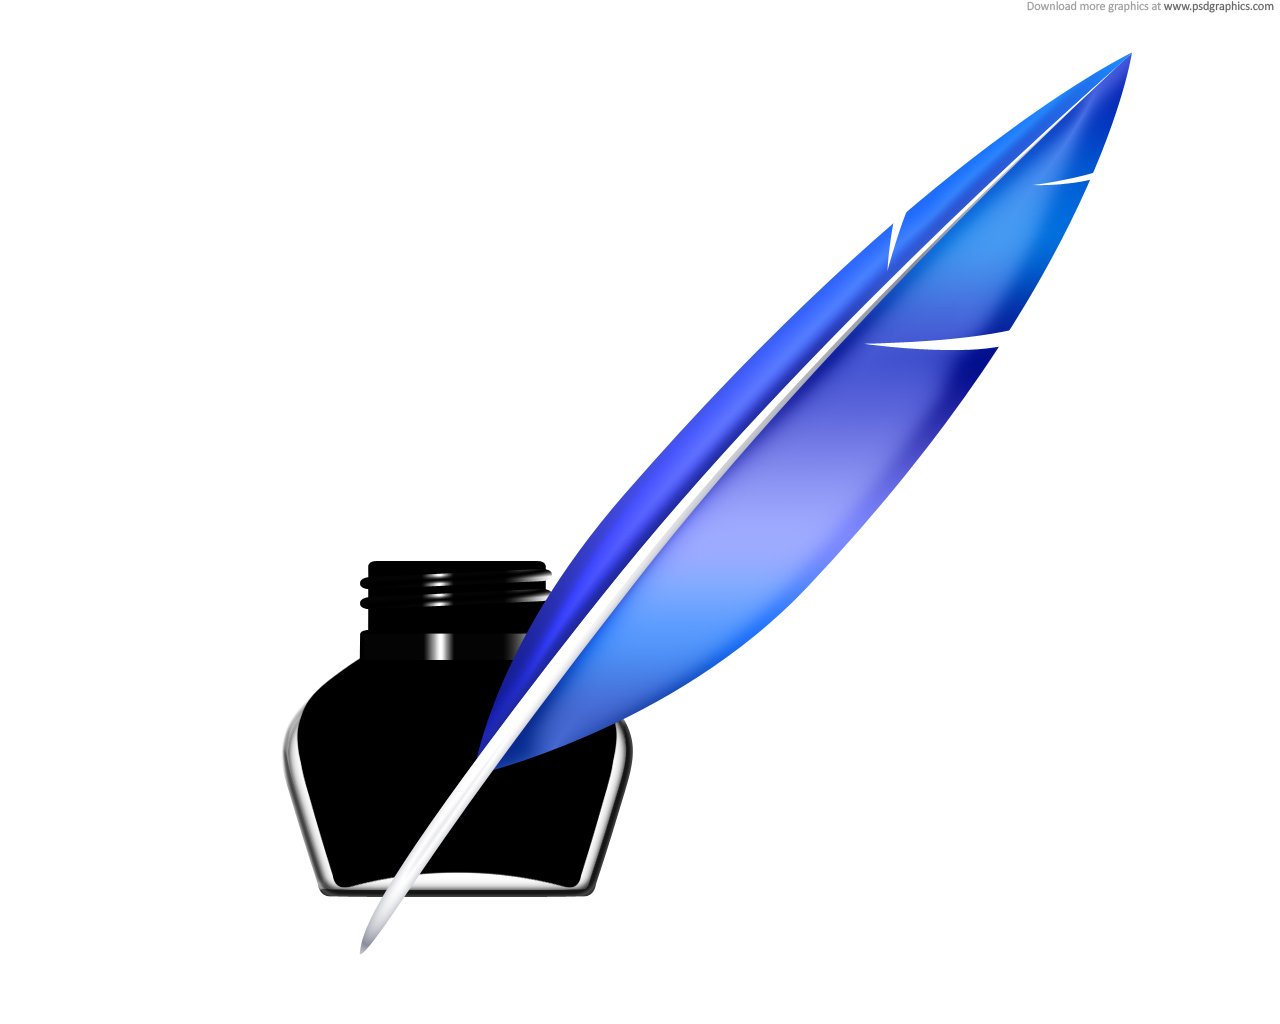 free clipart images quill pen - photo #44